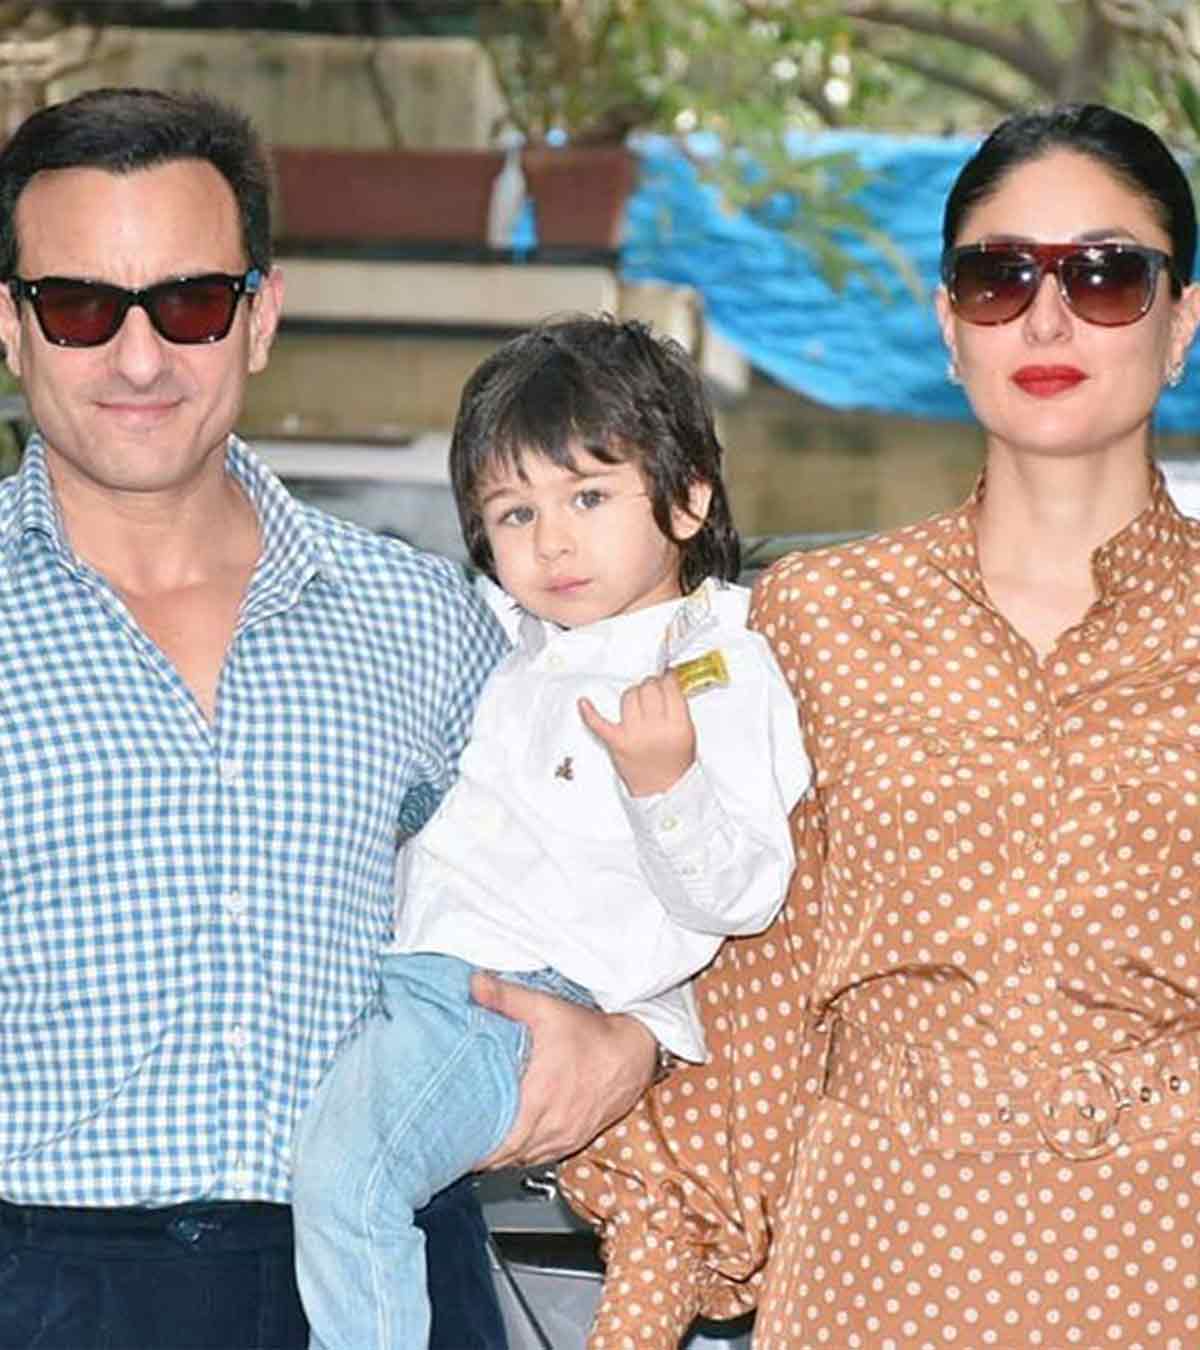 Taimur Ali Khan Is A Perfect Replica Of Dad Saif Ali Khan And This Viral Pic Is Proof. See It Here